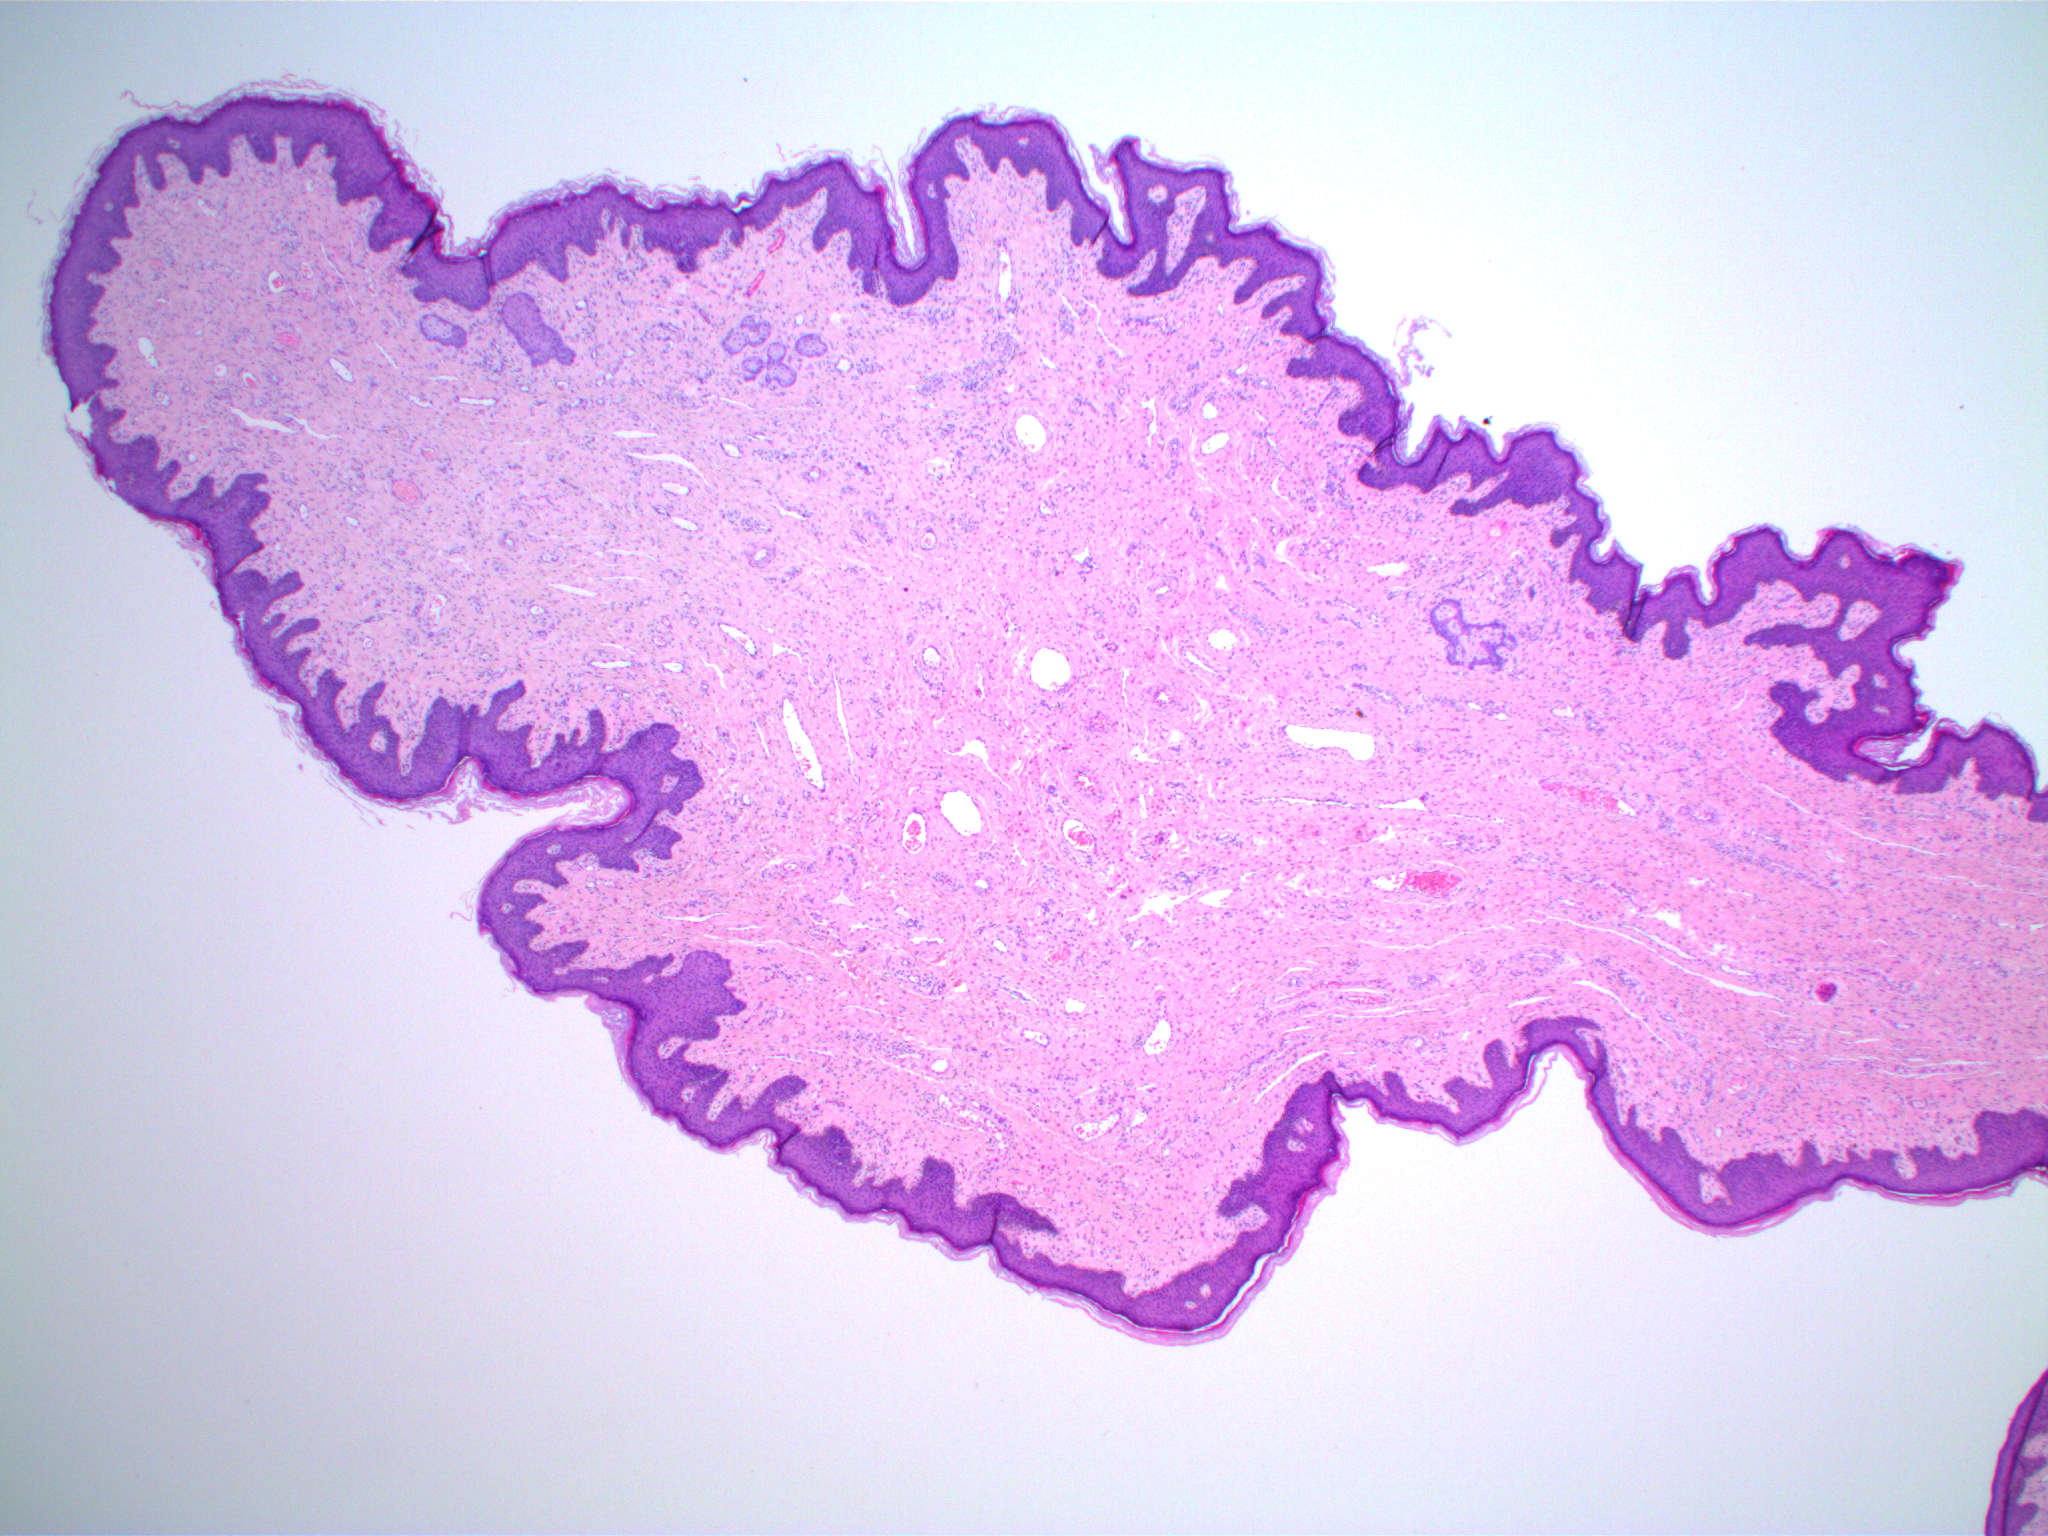 What is fibroepithelial papilloma - Squamous papilloma vs fibroepithelial polyp